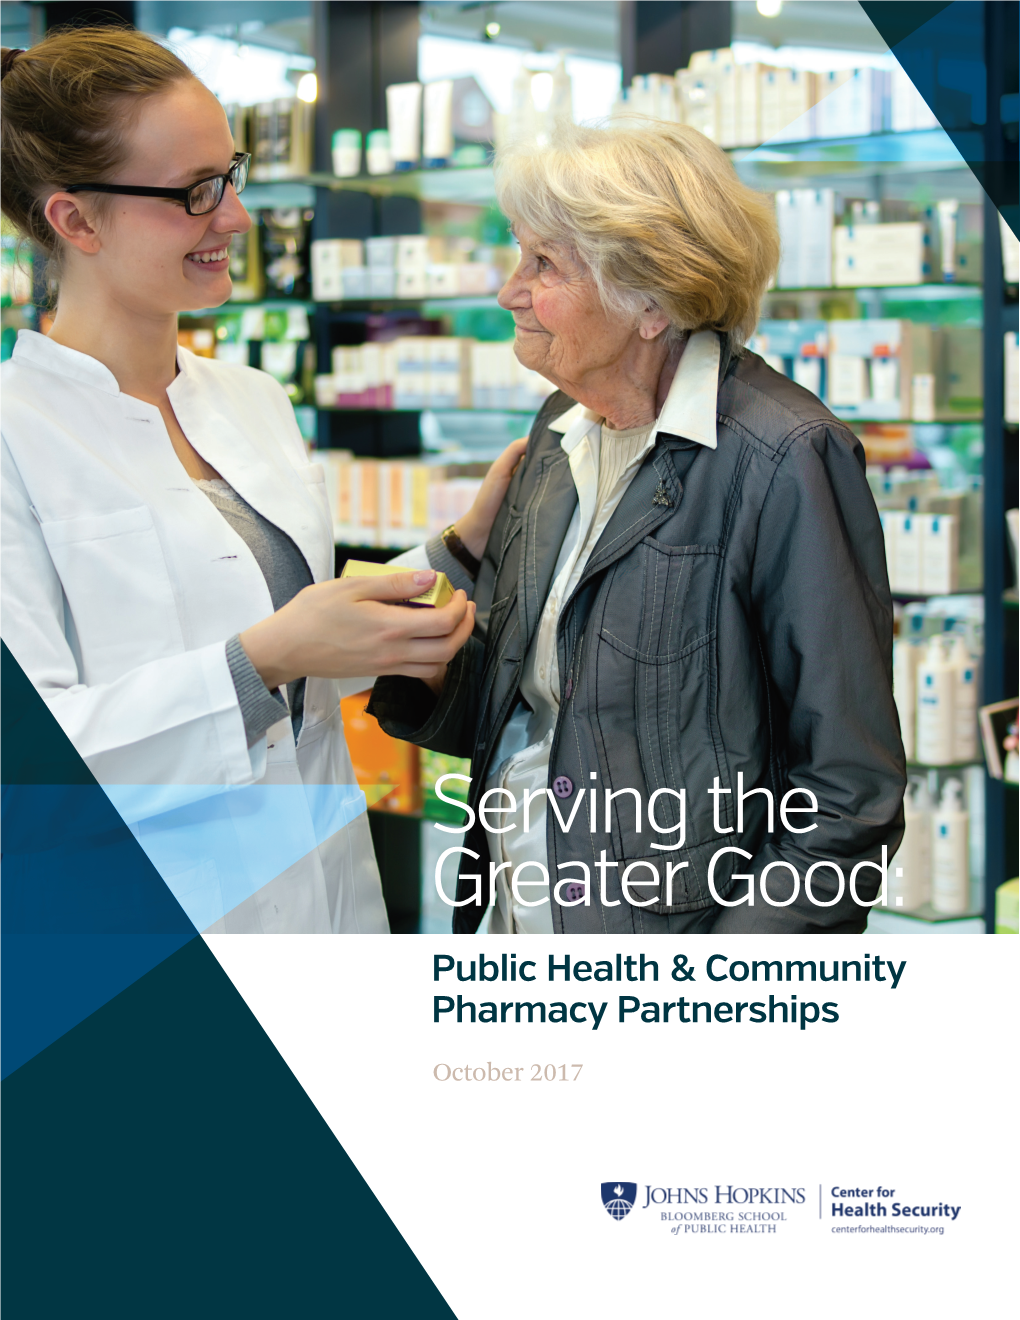 Serving the Greater Good: Public Health & Community Pharmacy